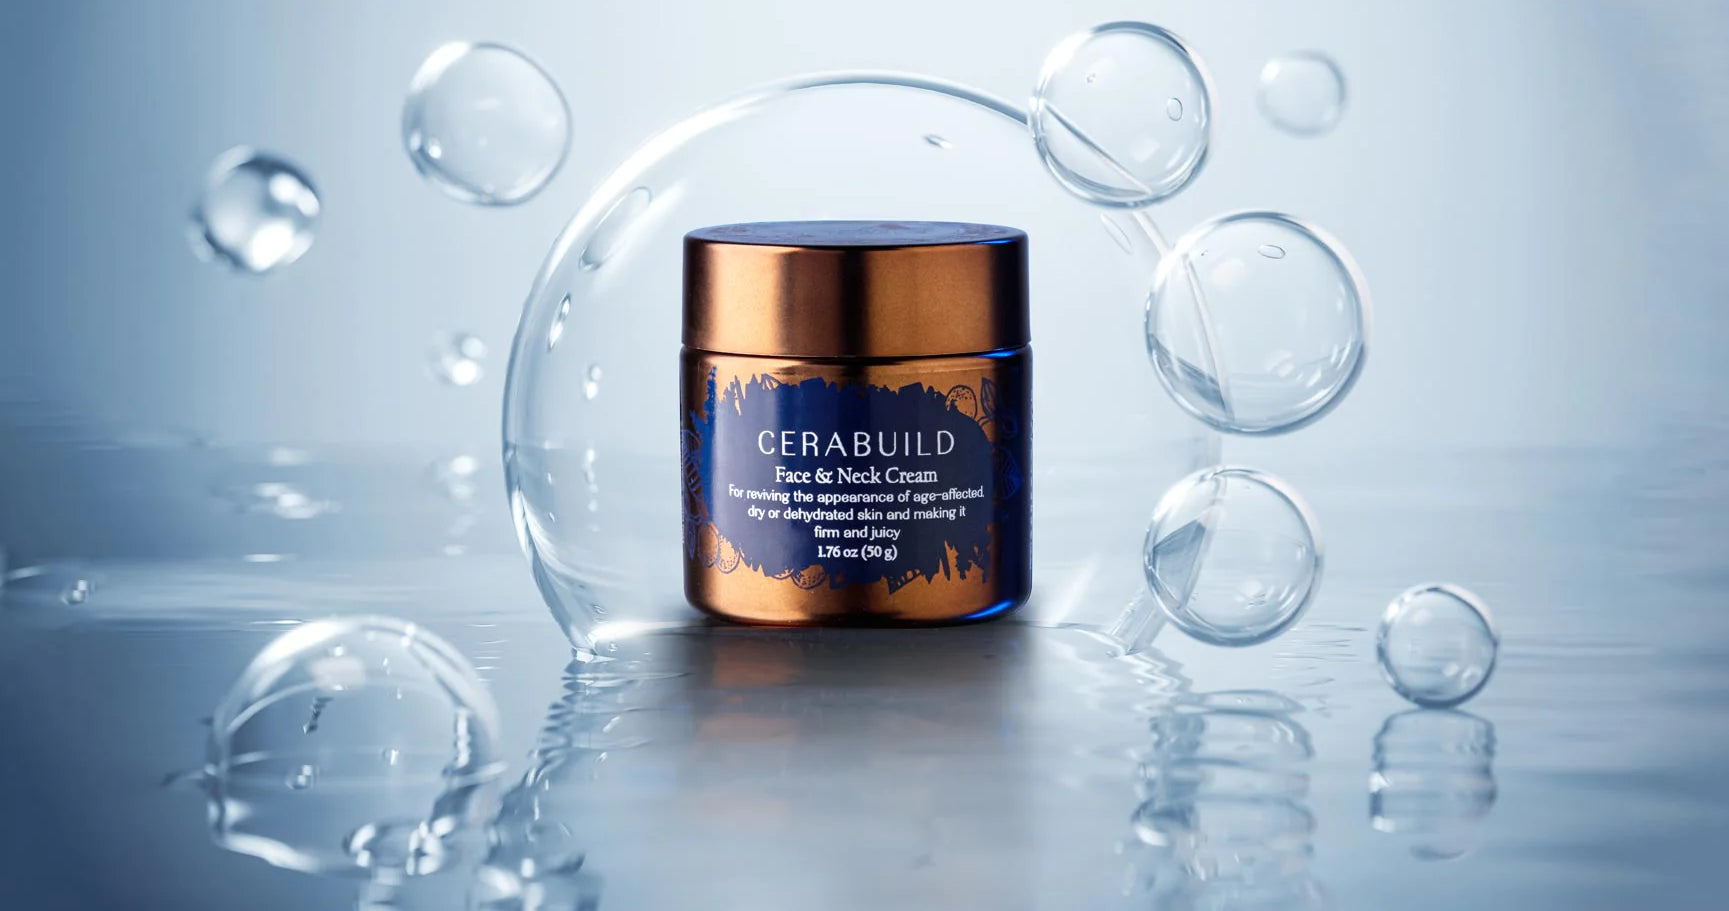 an image of Cerabuild showing super hydration booster technology.